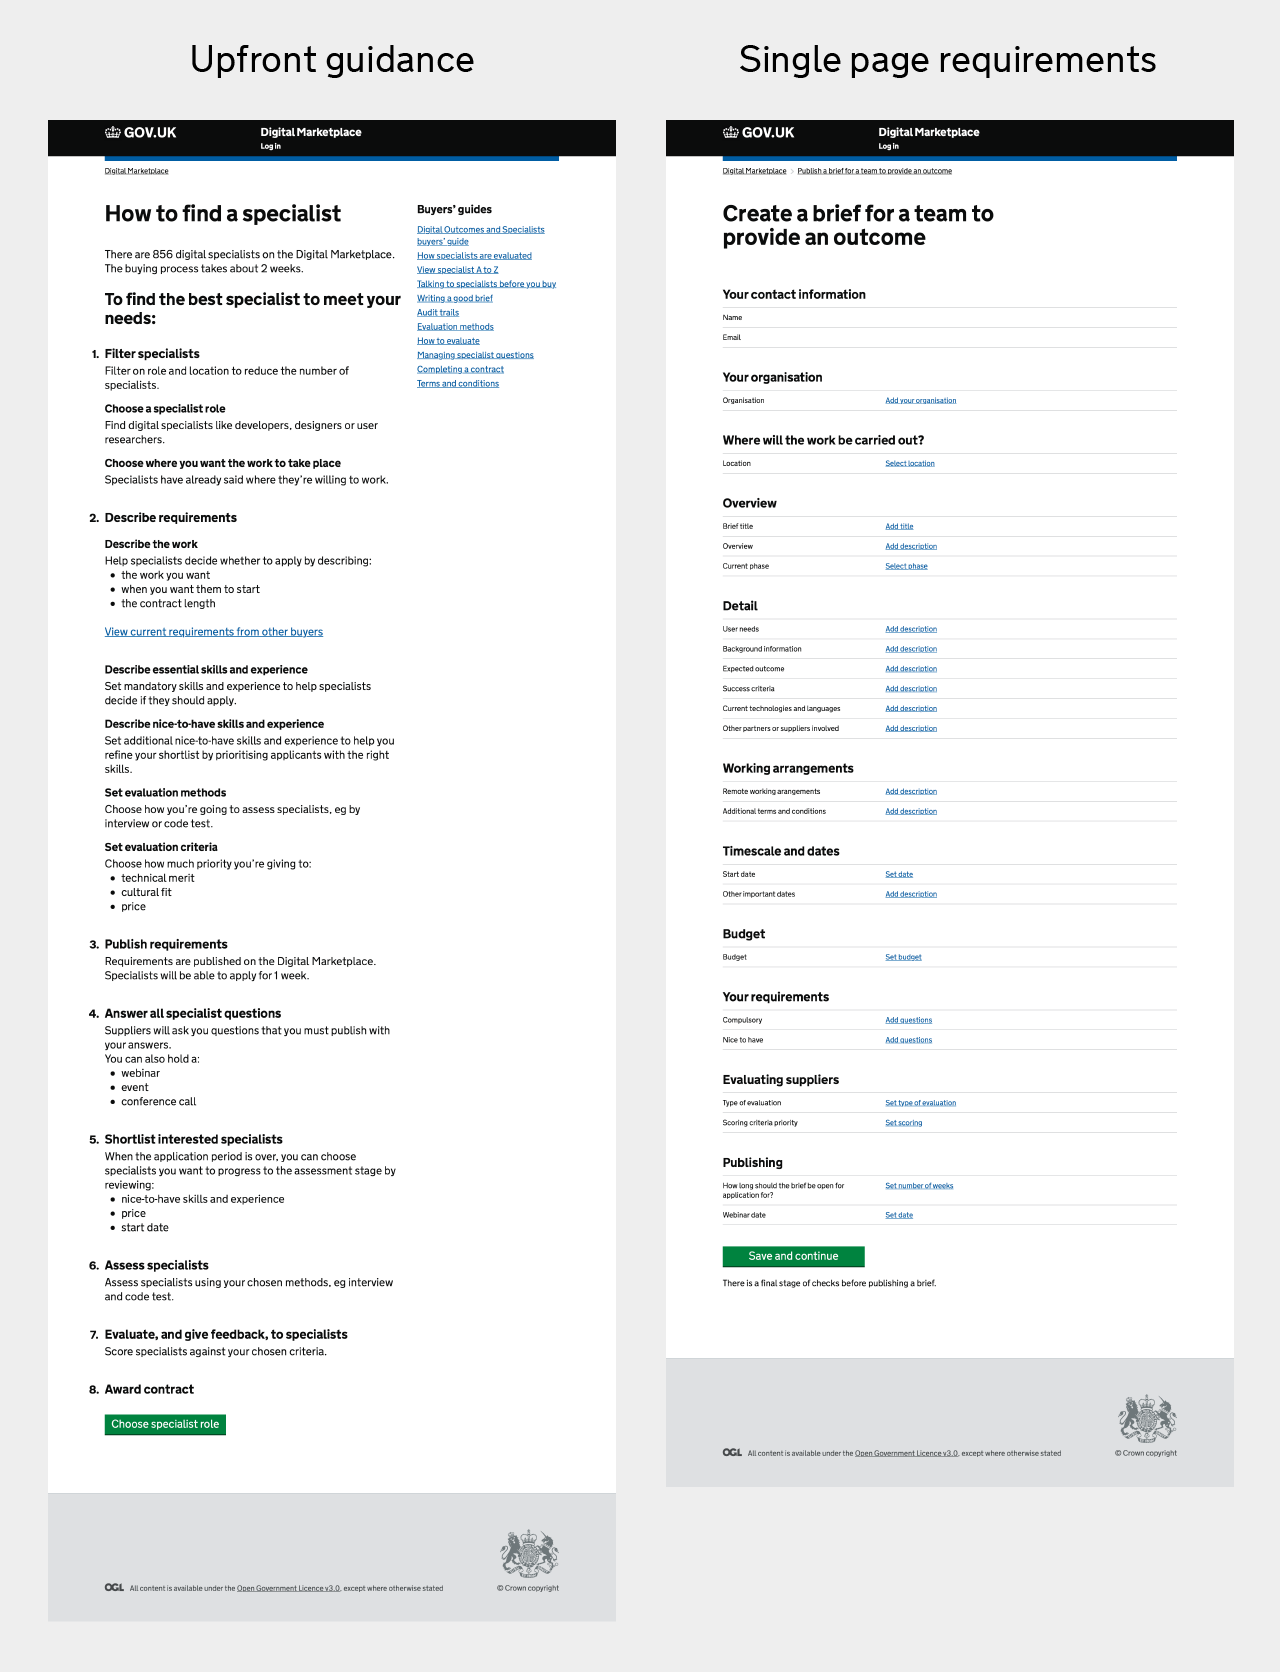 The image on the left shows all the guidance upfront on one page. The image on the right shows how buyers can add their requirements in a single long page